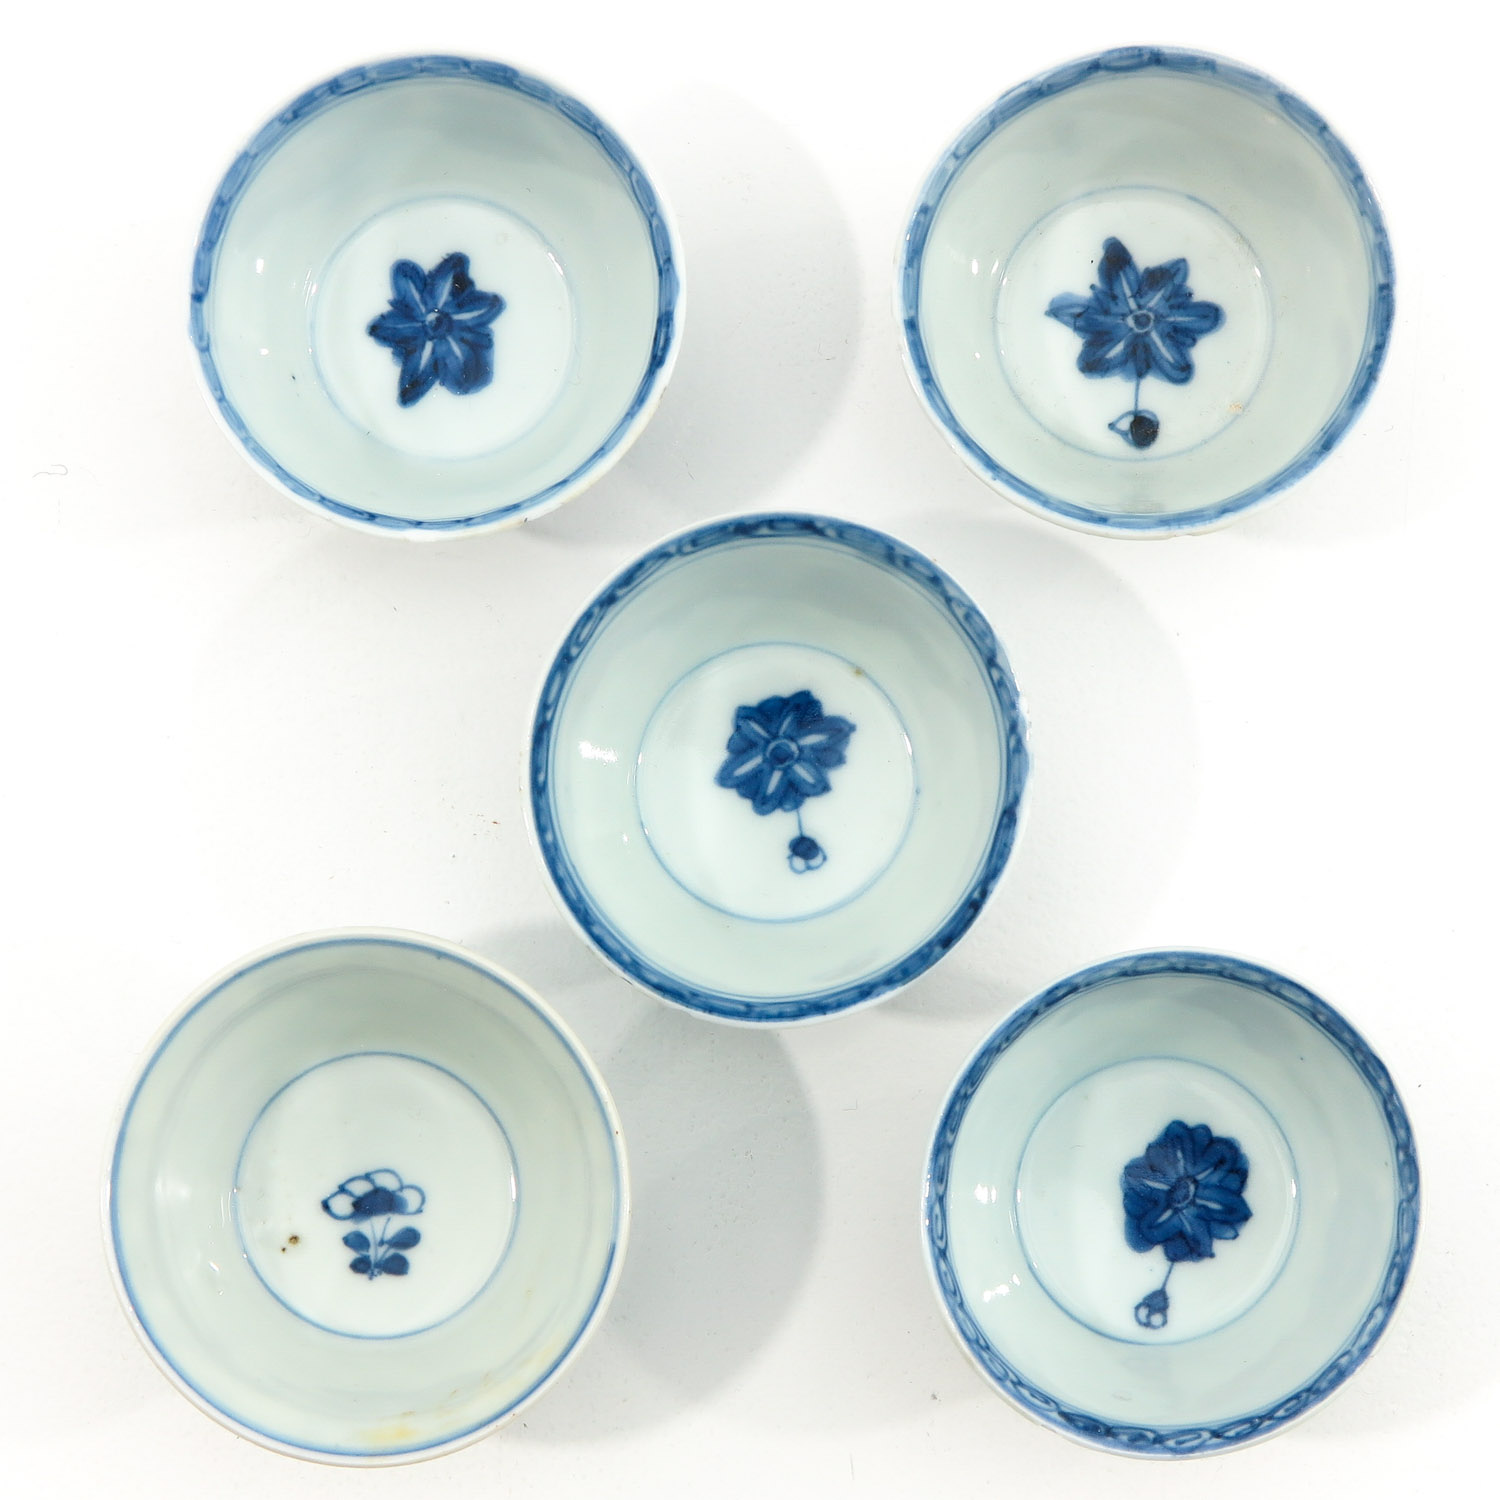 A Set of 5 Cups and Saucers - Image 4 of 9